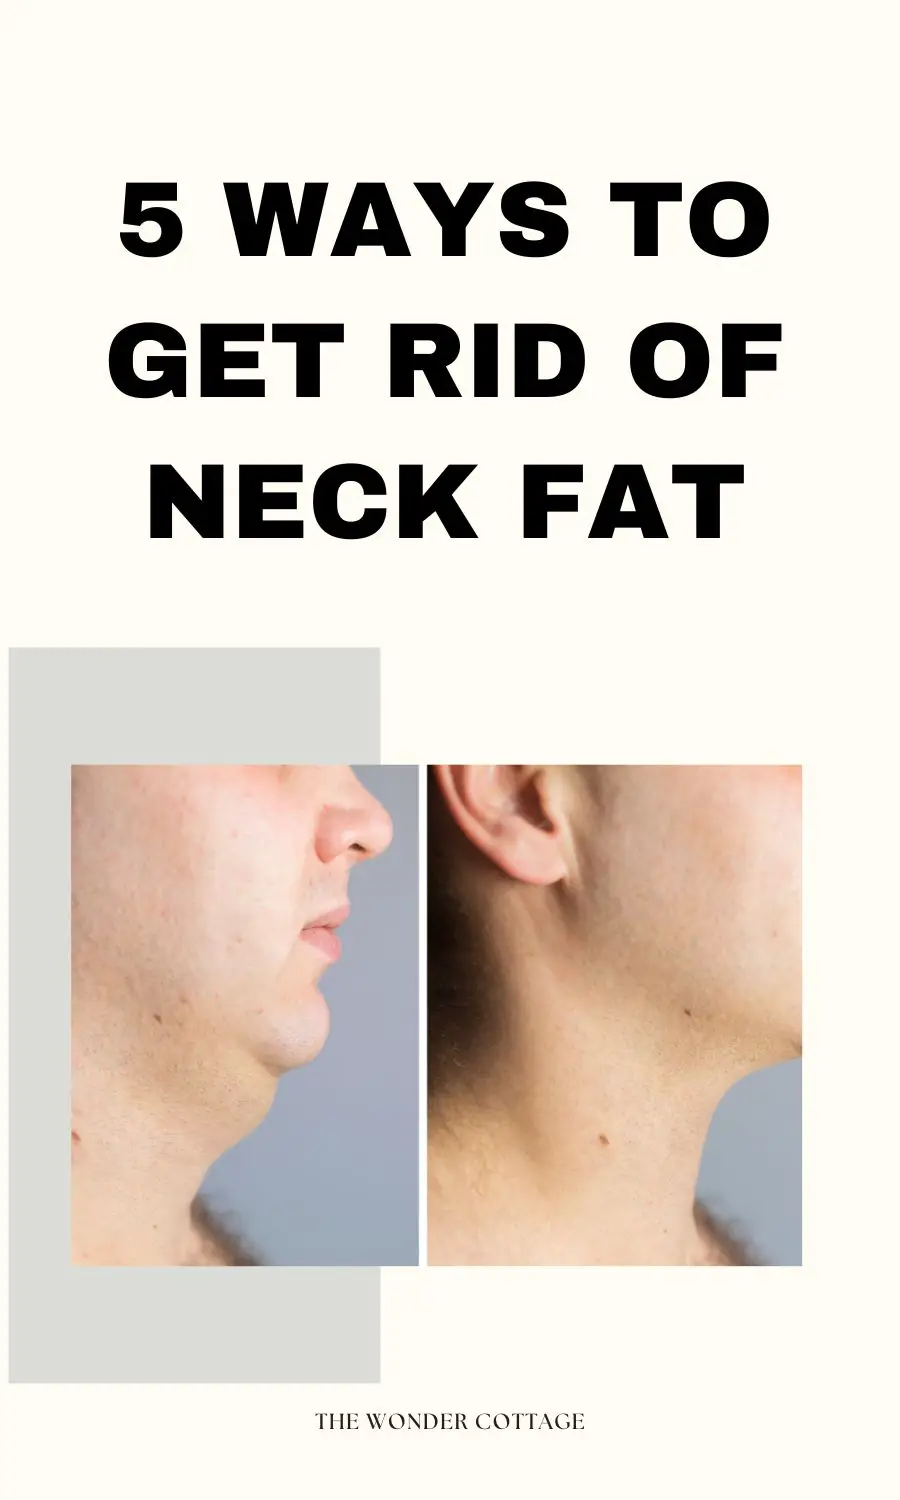 How To Get Rid Of Neck Fat Once And For All?